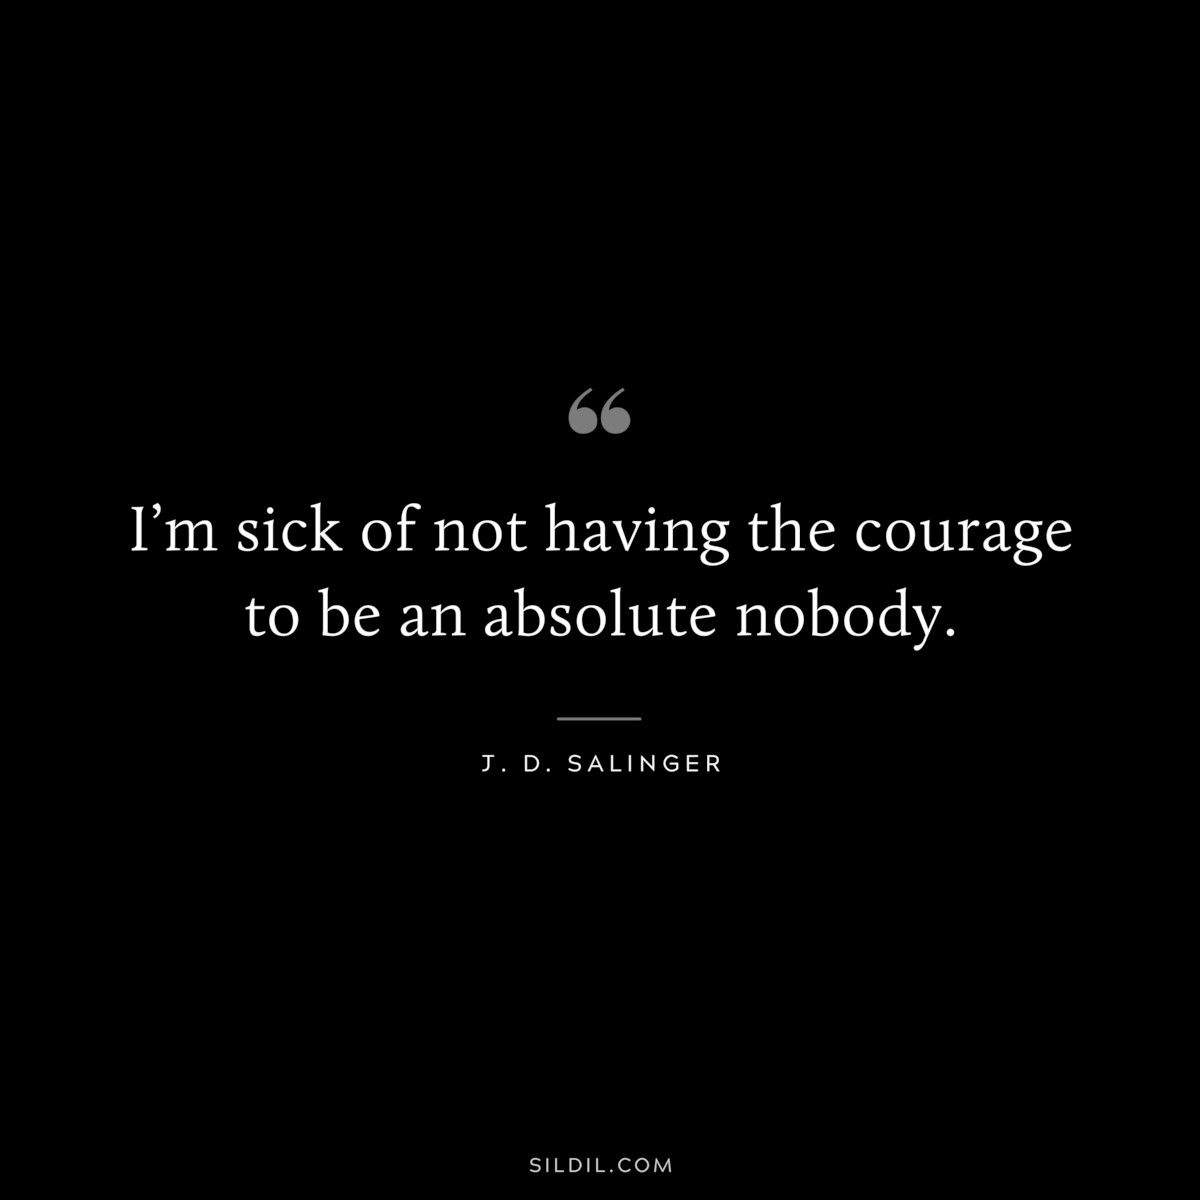 I’m sick of not having the courage to be an absolute nobody. — J. D. Salinger